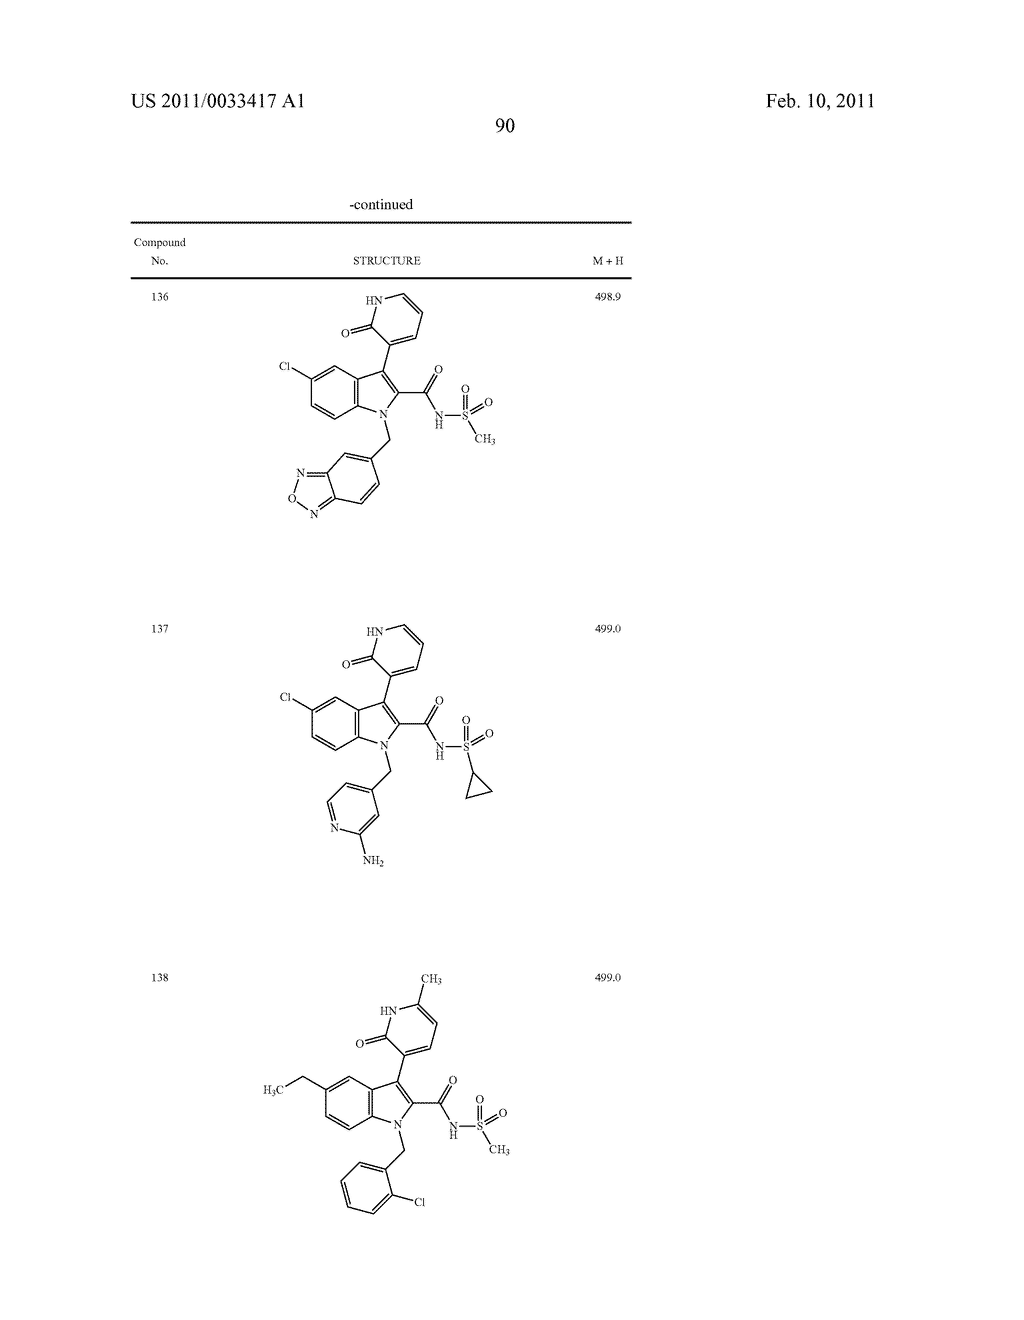 2,3-SUBSTITUTED INDOLE DERIVATIVES FOR TREATING VIRAL INFECTIONS - diagram, schematic, and image 91